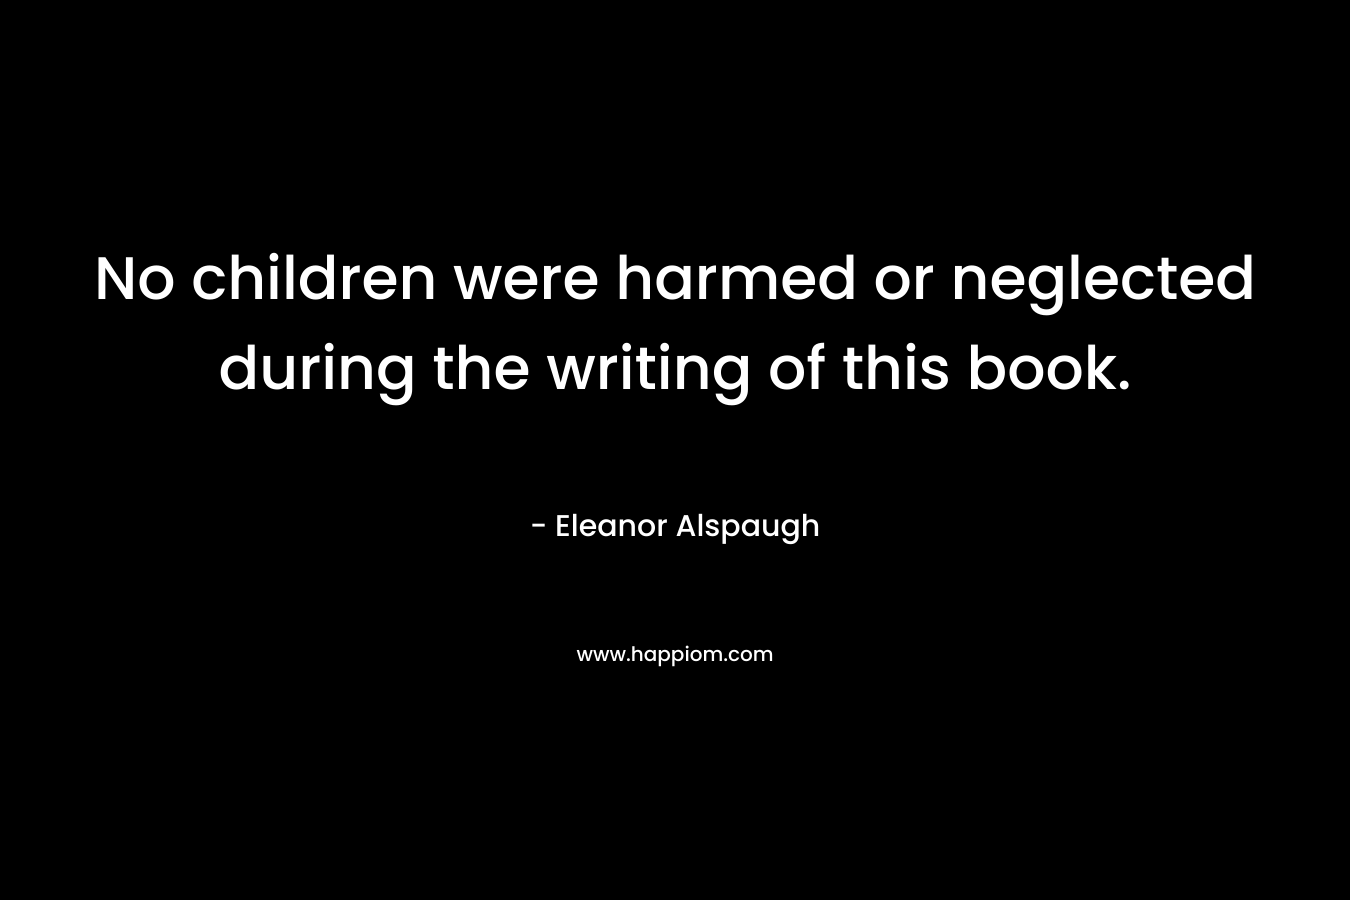 No children were harmed or neglected during the writing of this book. – Eleanor Alspaugh